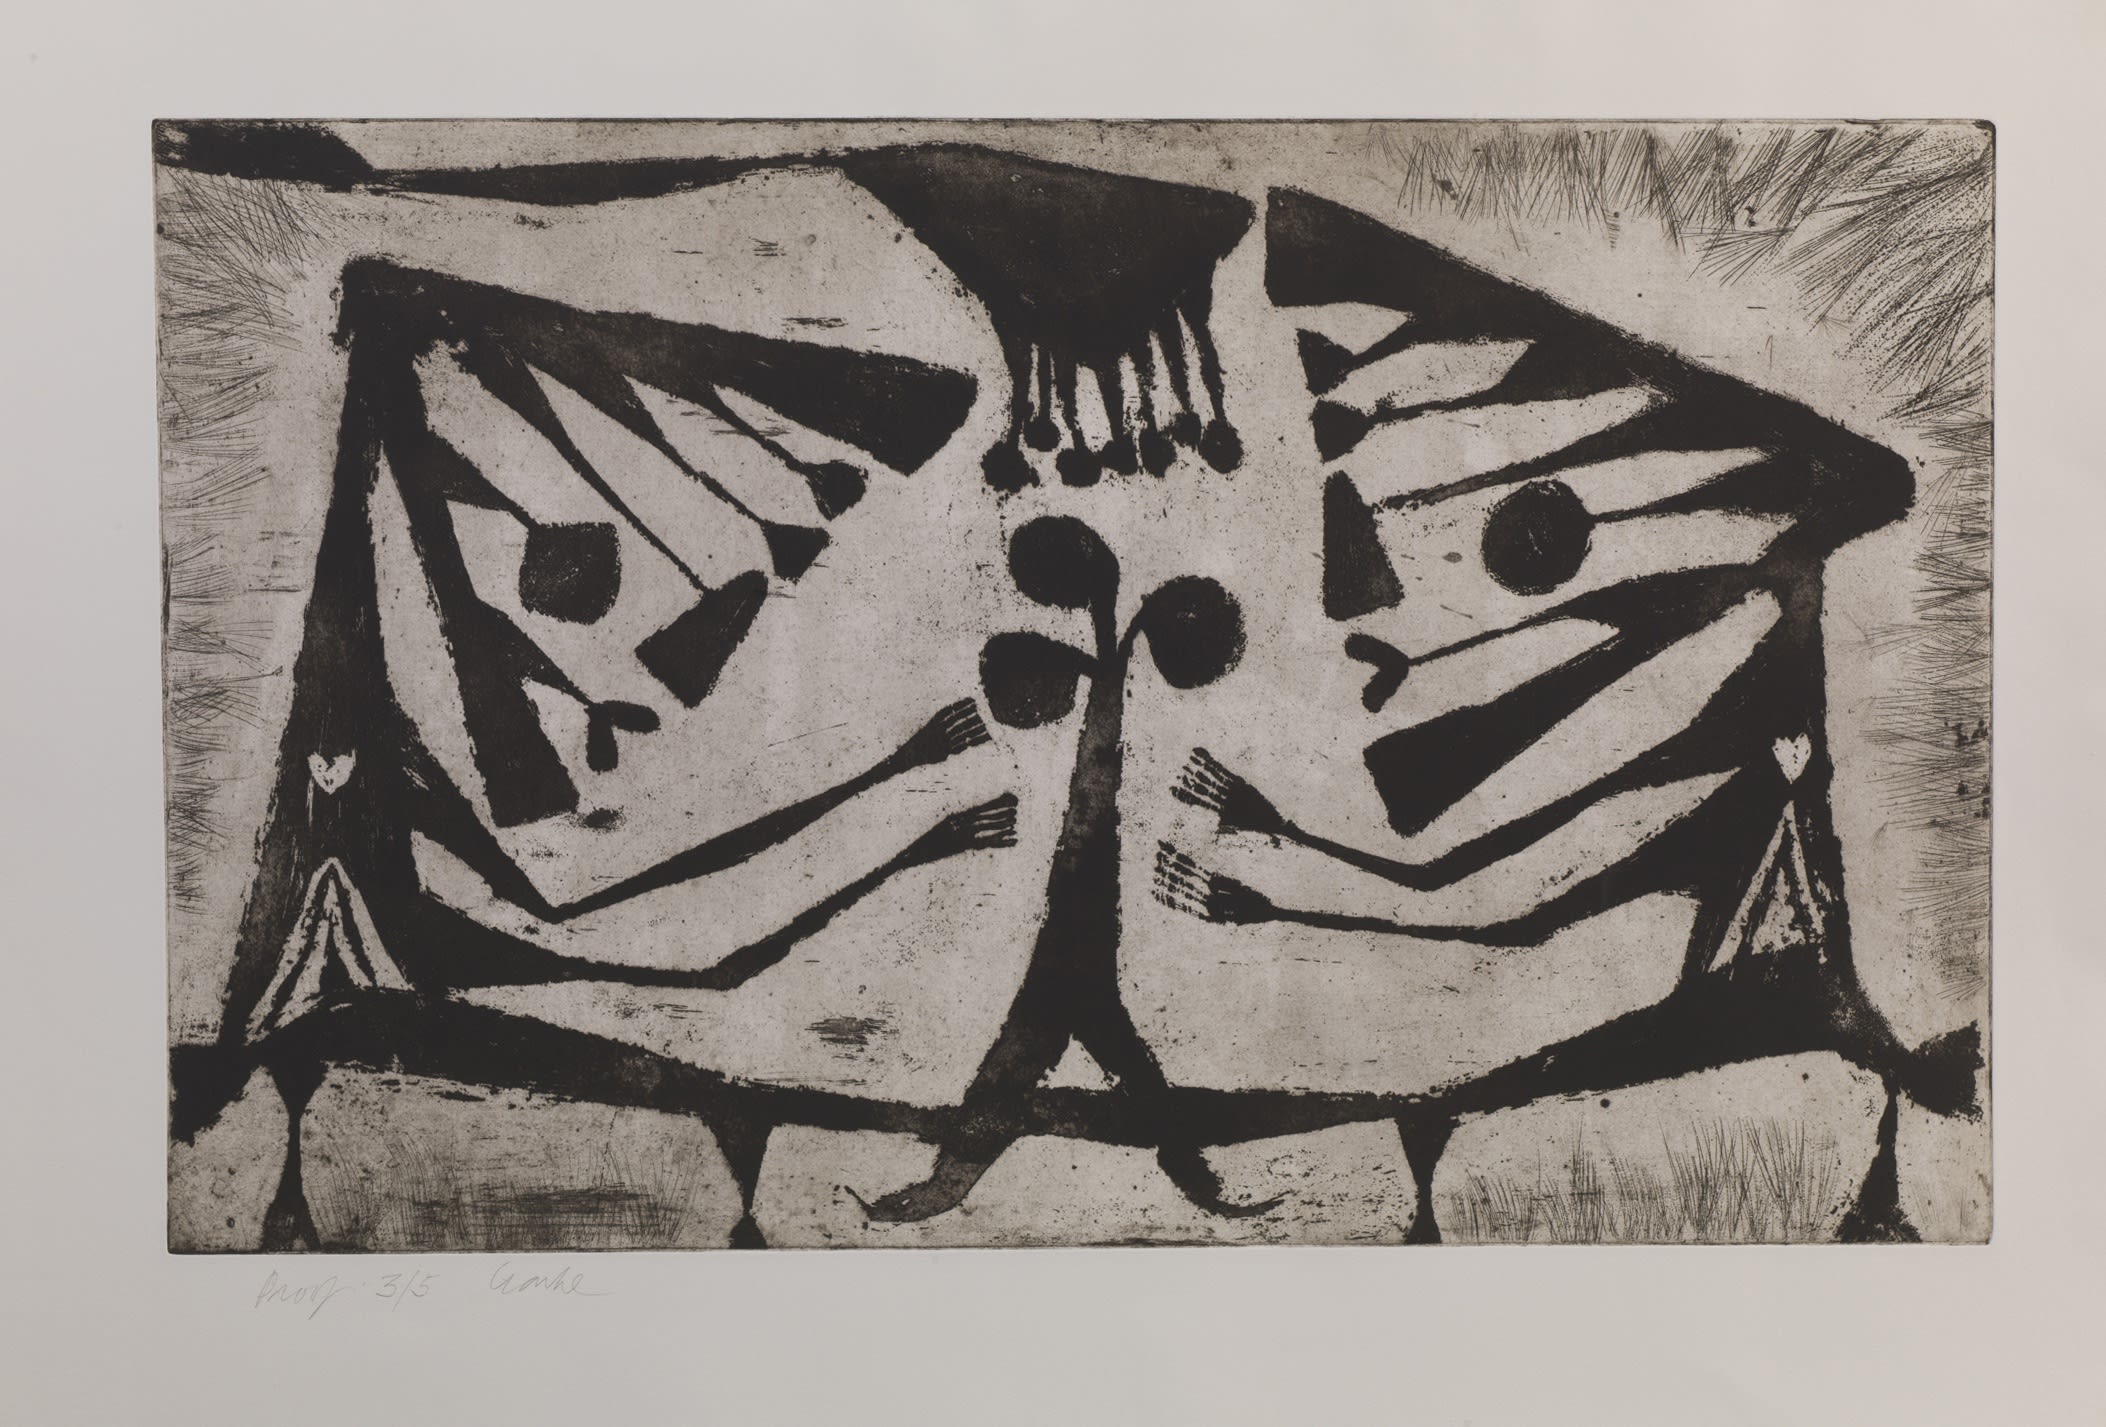 Geoffrey Clarke, Adoration of Nature, 1951, Edition of 10